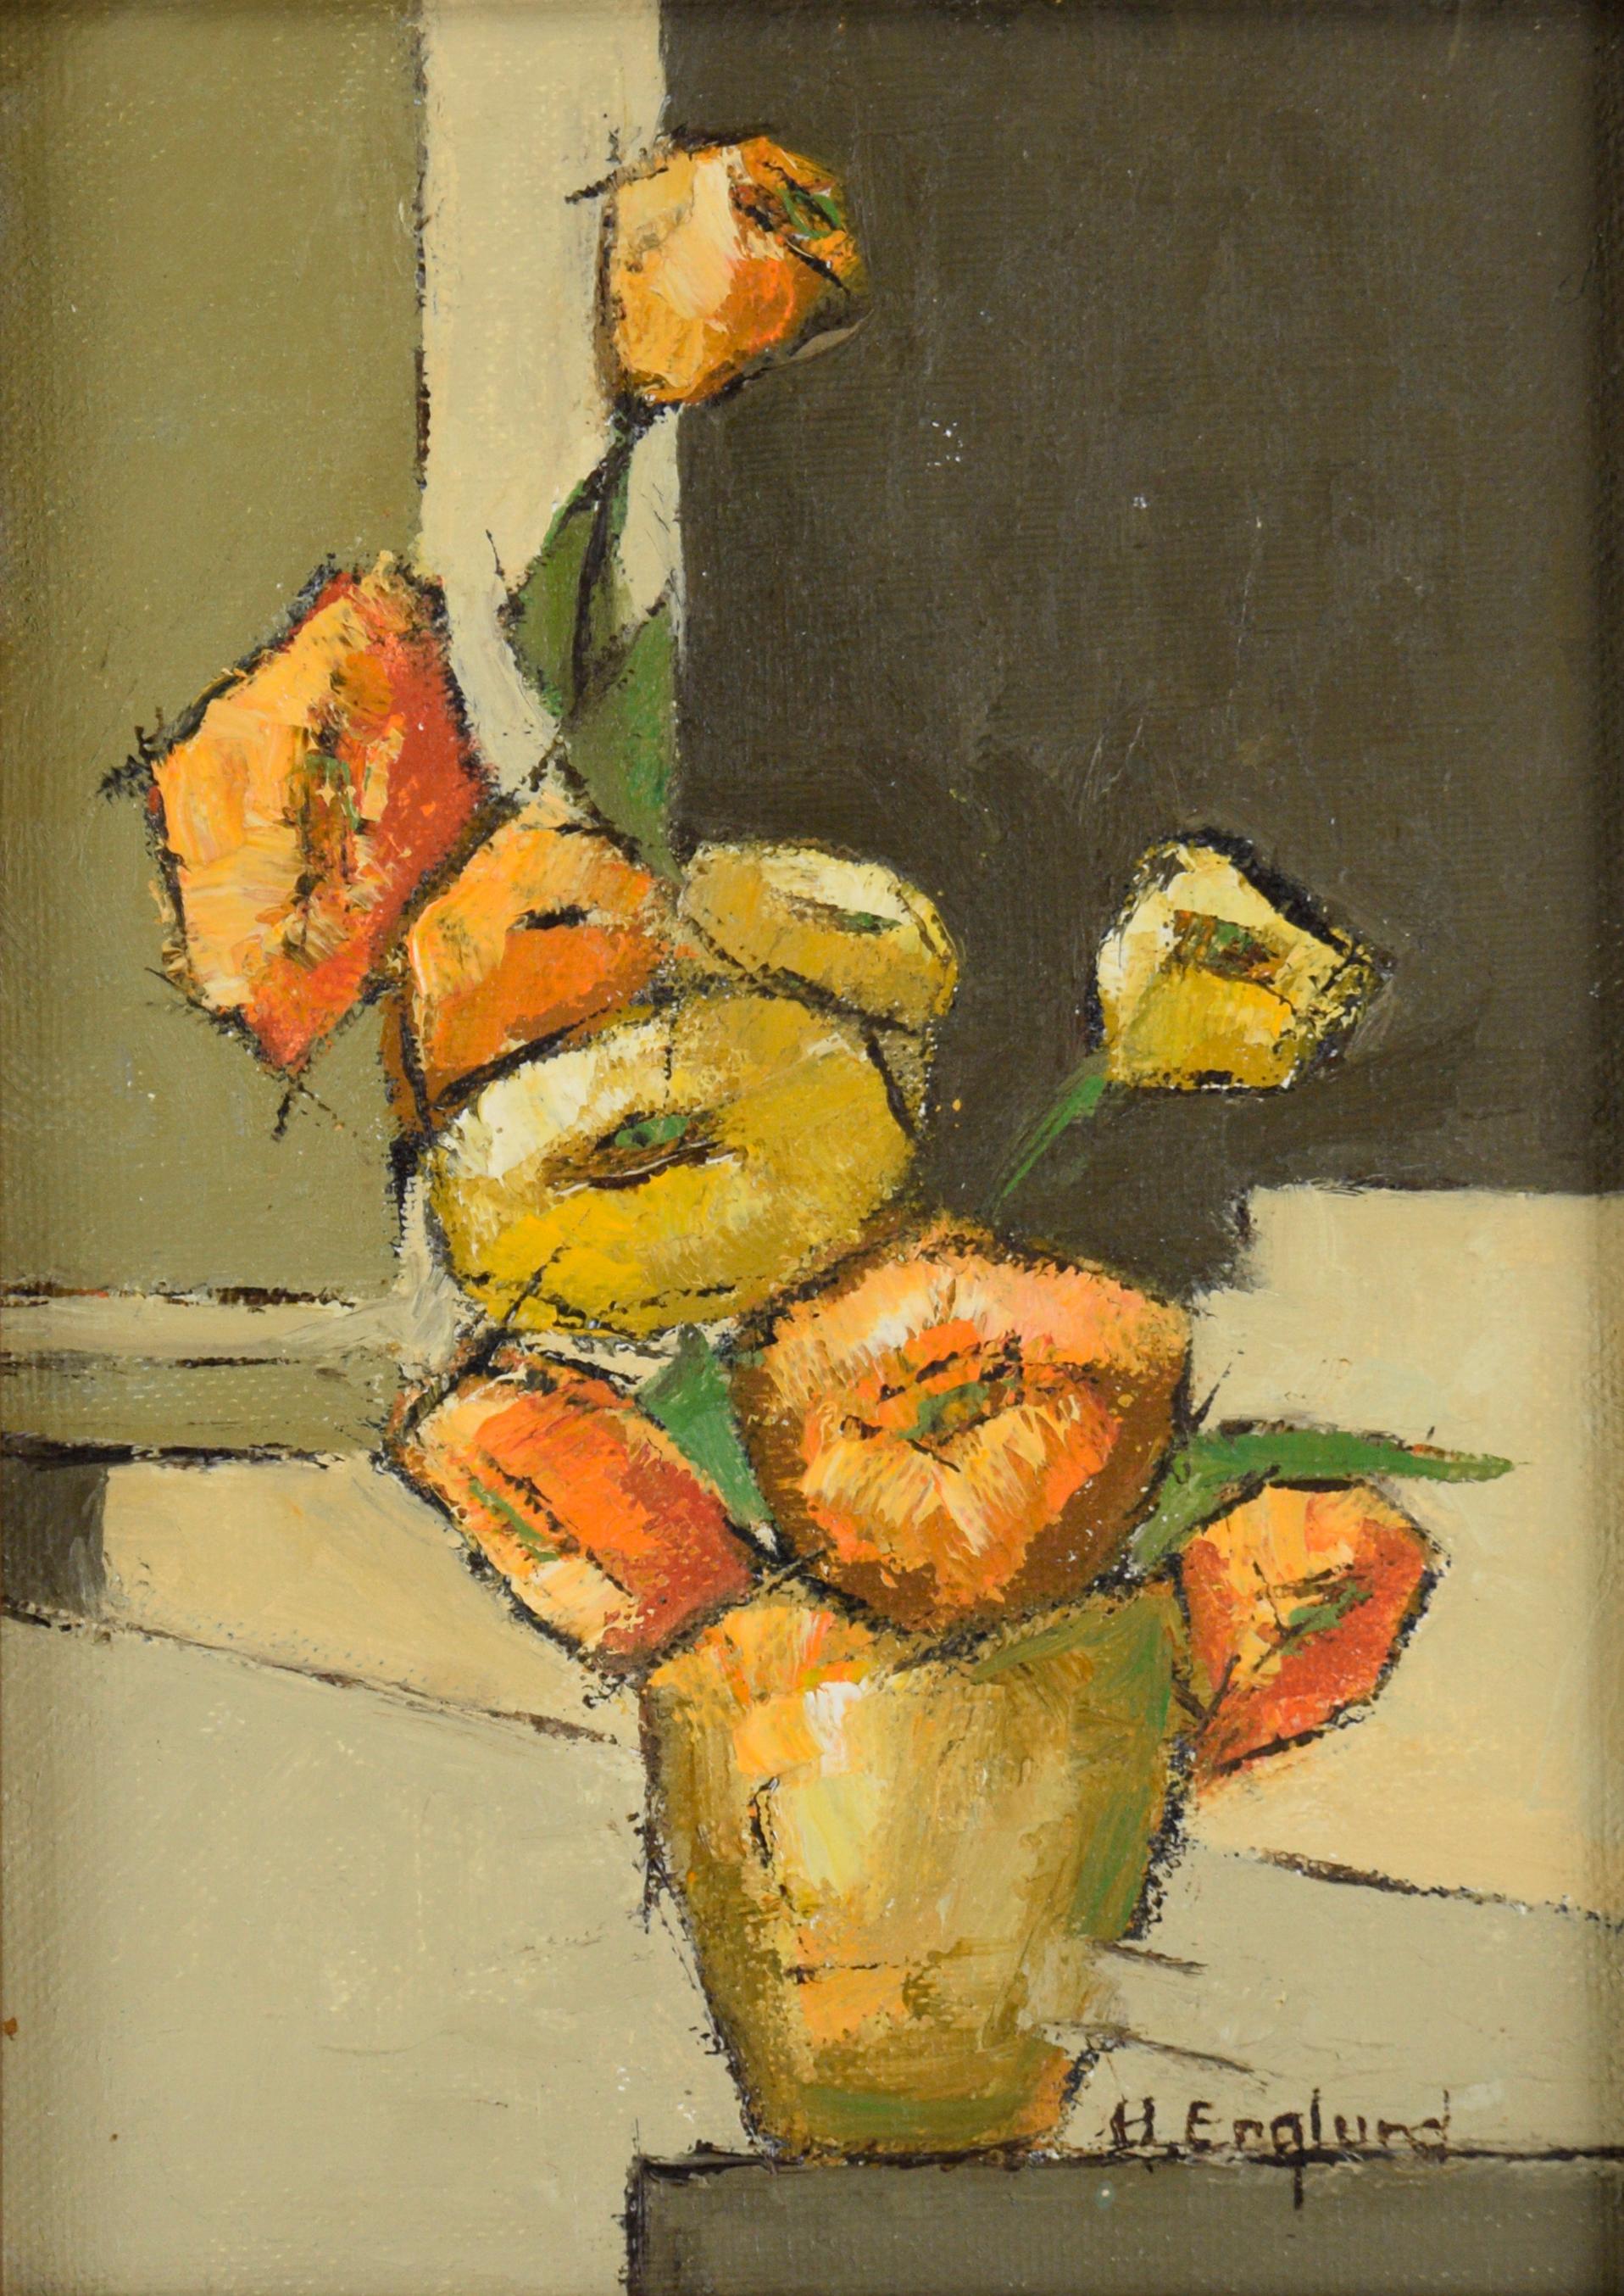 Yellow and Orange Poppies - Still Life in Oil on Artist's Board - Painting by Harriet Englund